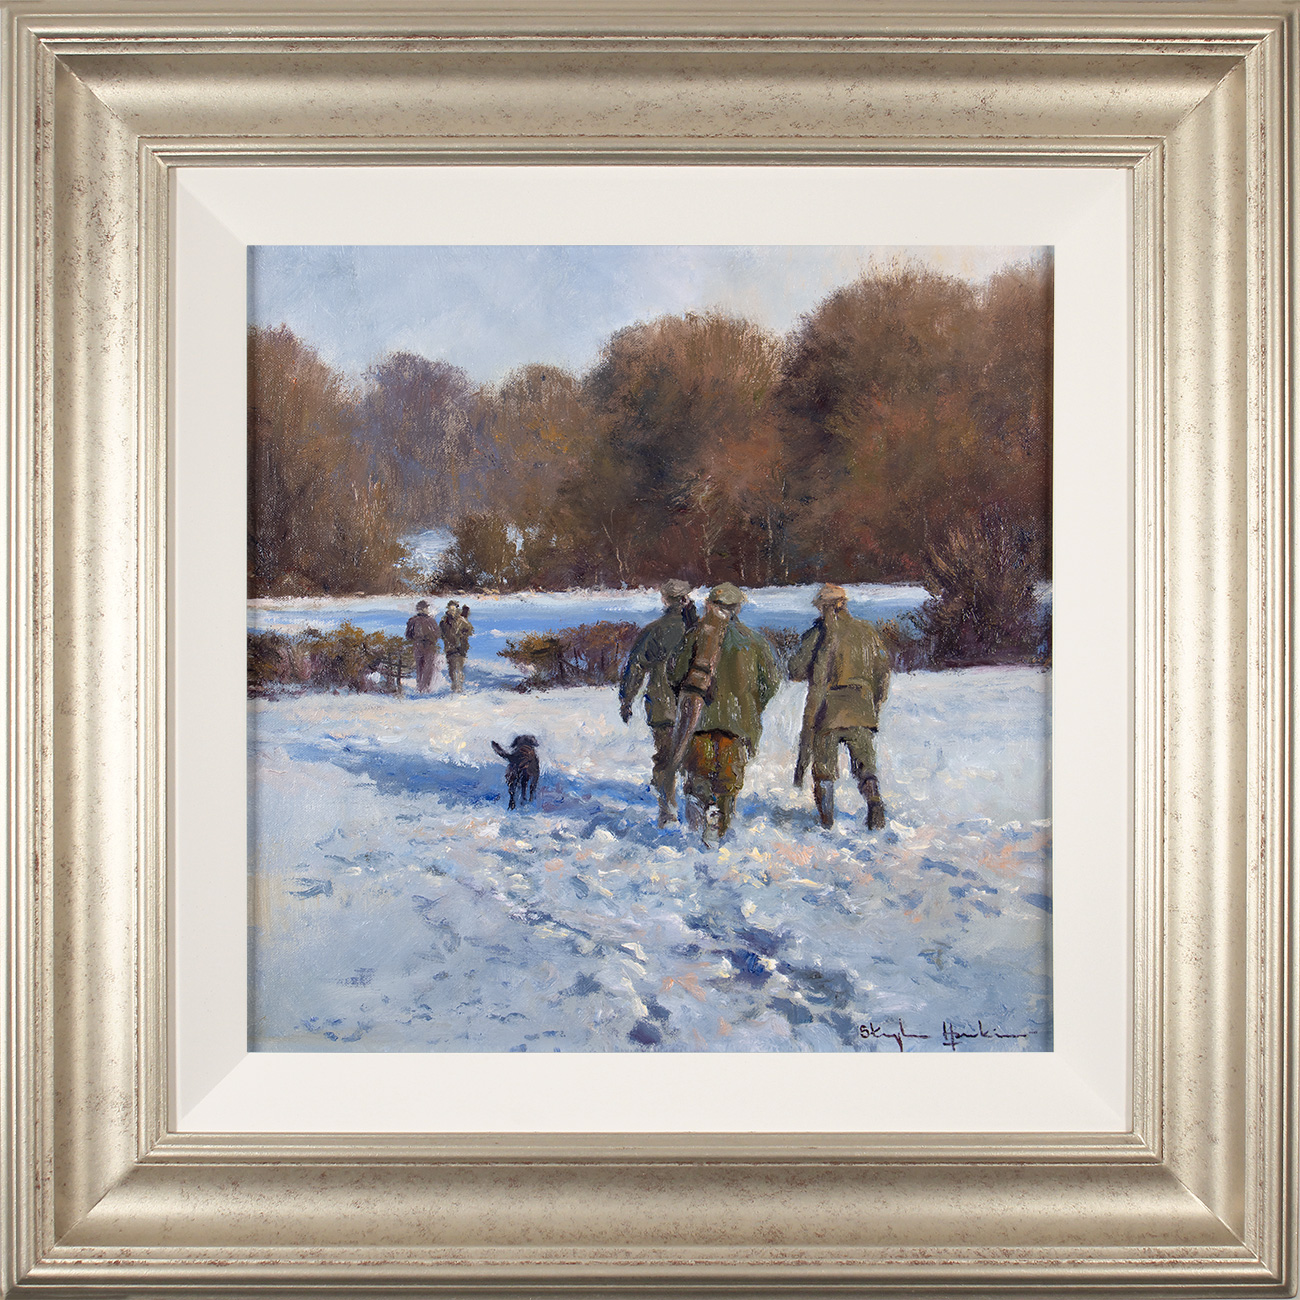 Stephen Hawkins, Original oil painting on canvas, Winter Morning, North Yorkshire, click to enlarge